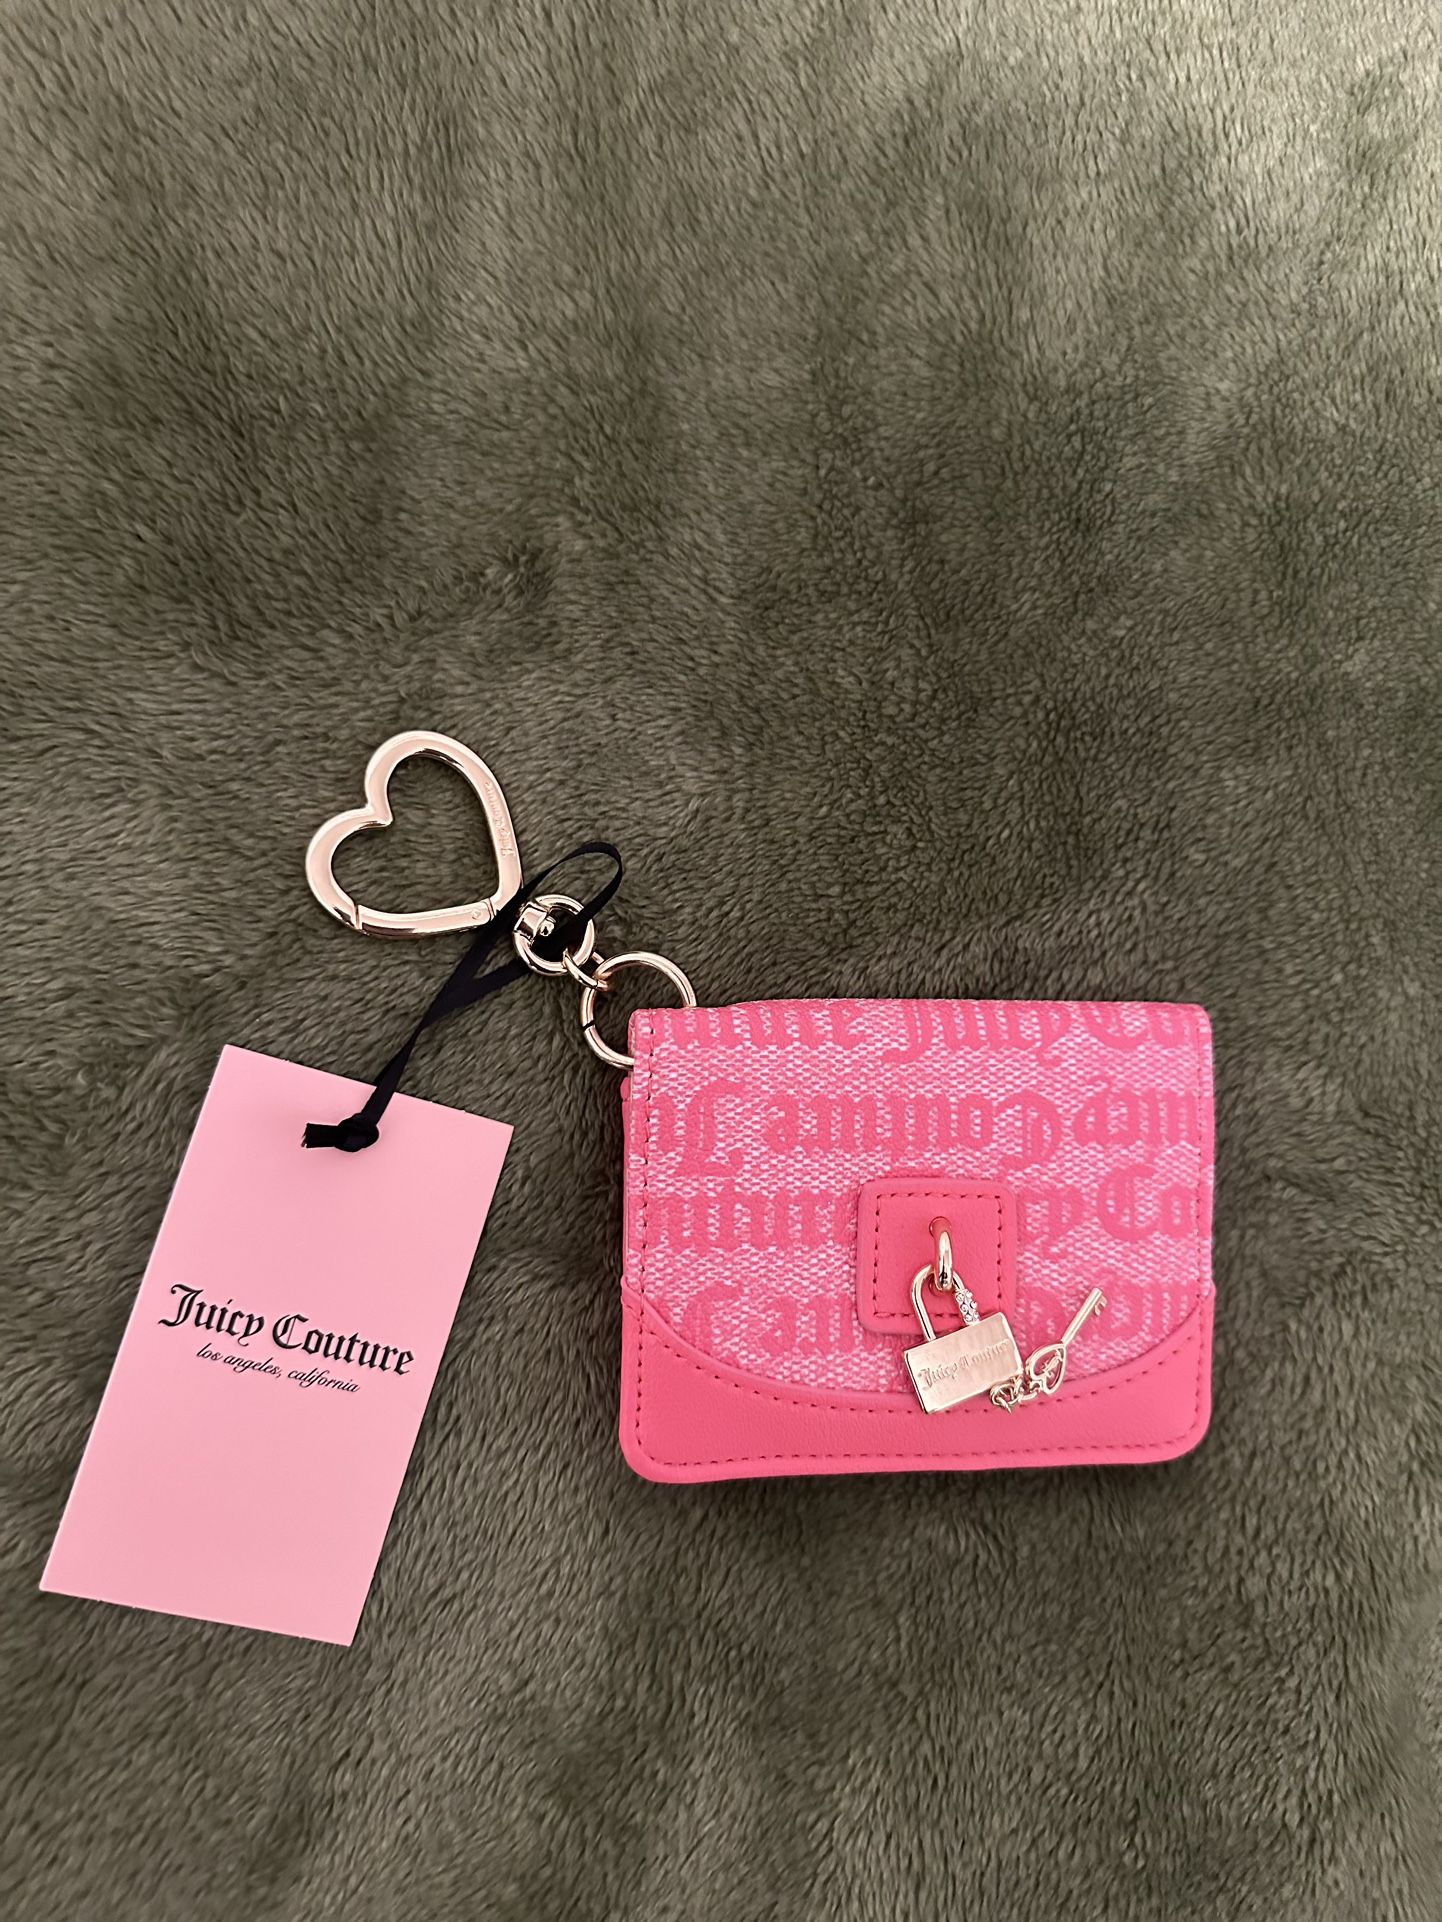 Juicy Couture pink Lock card holder🩷